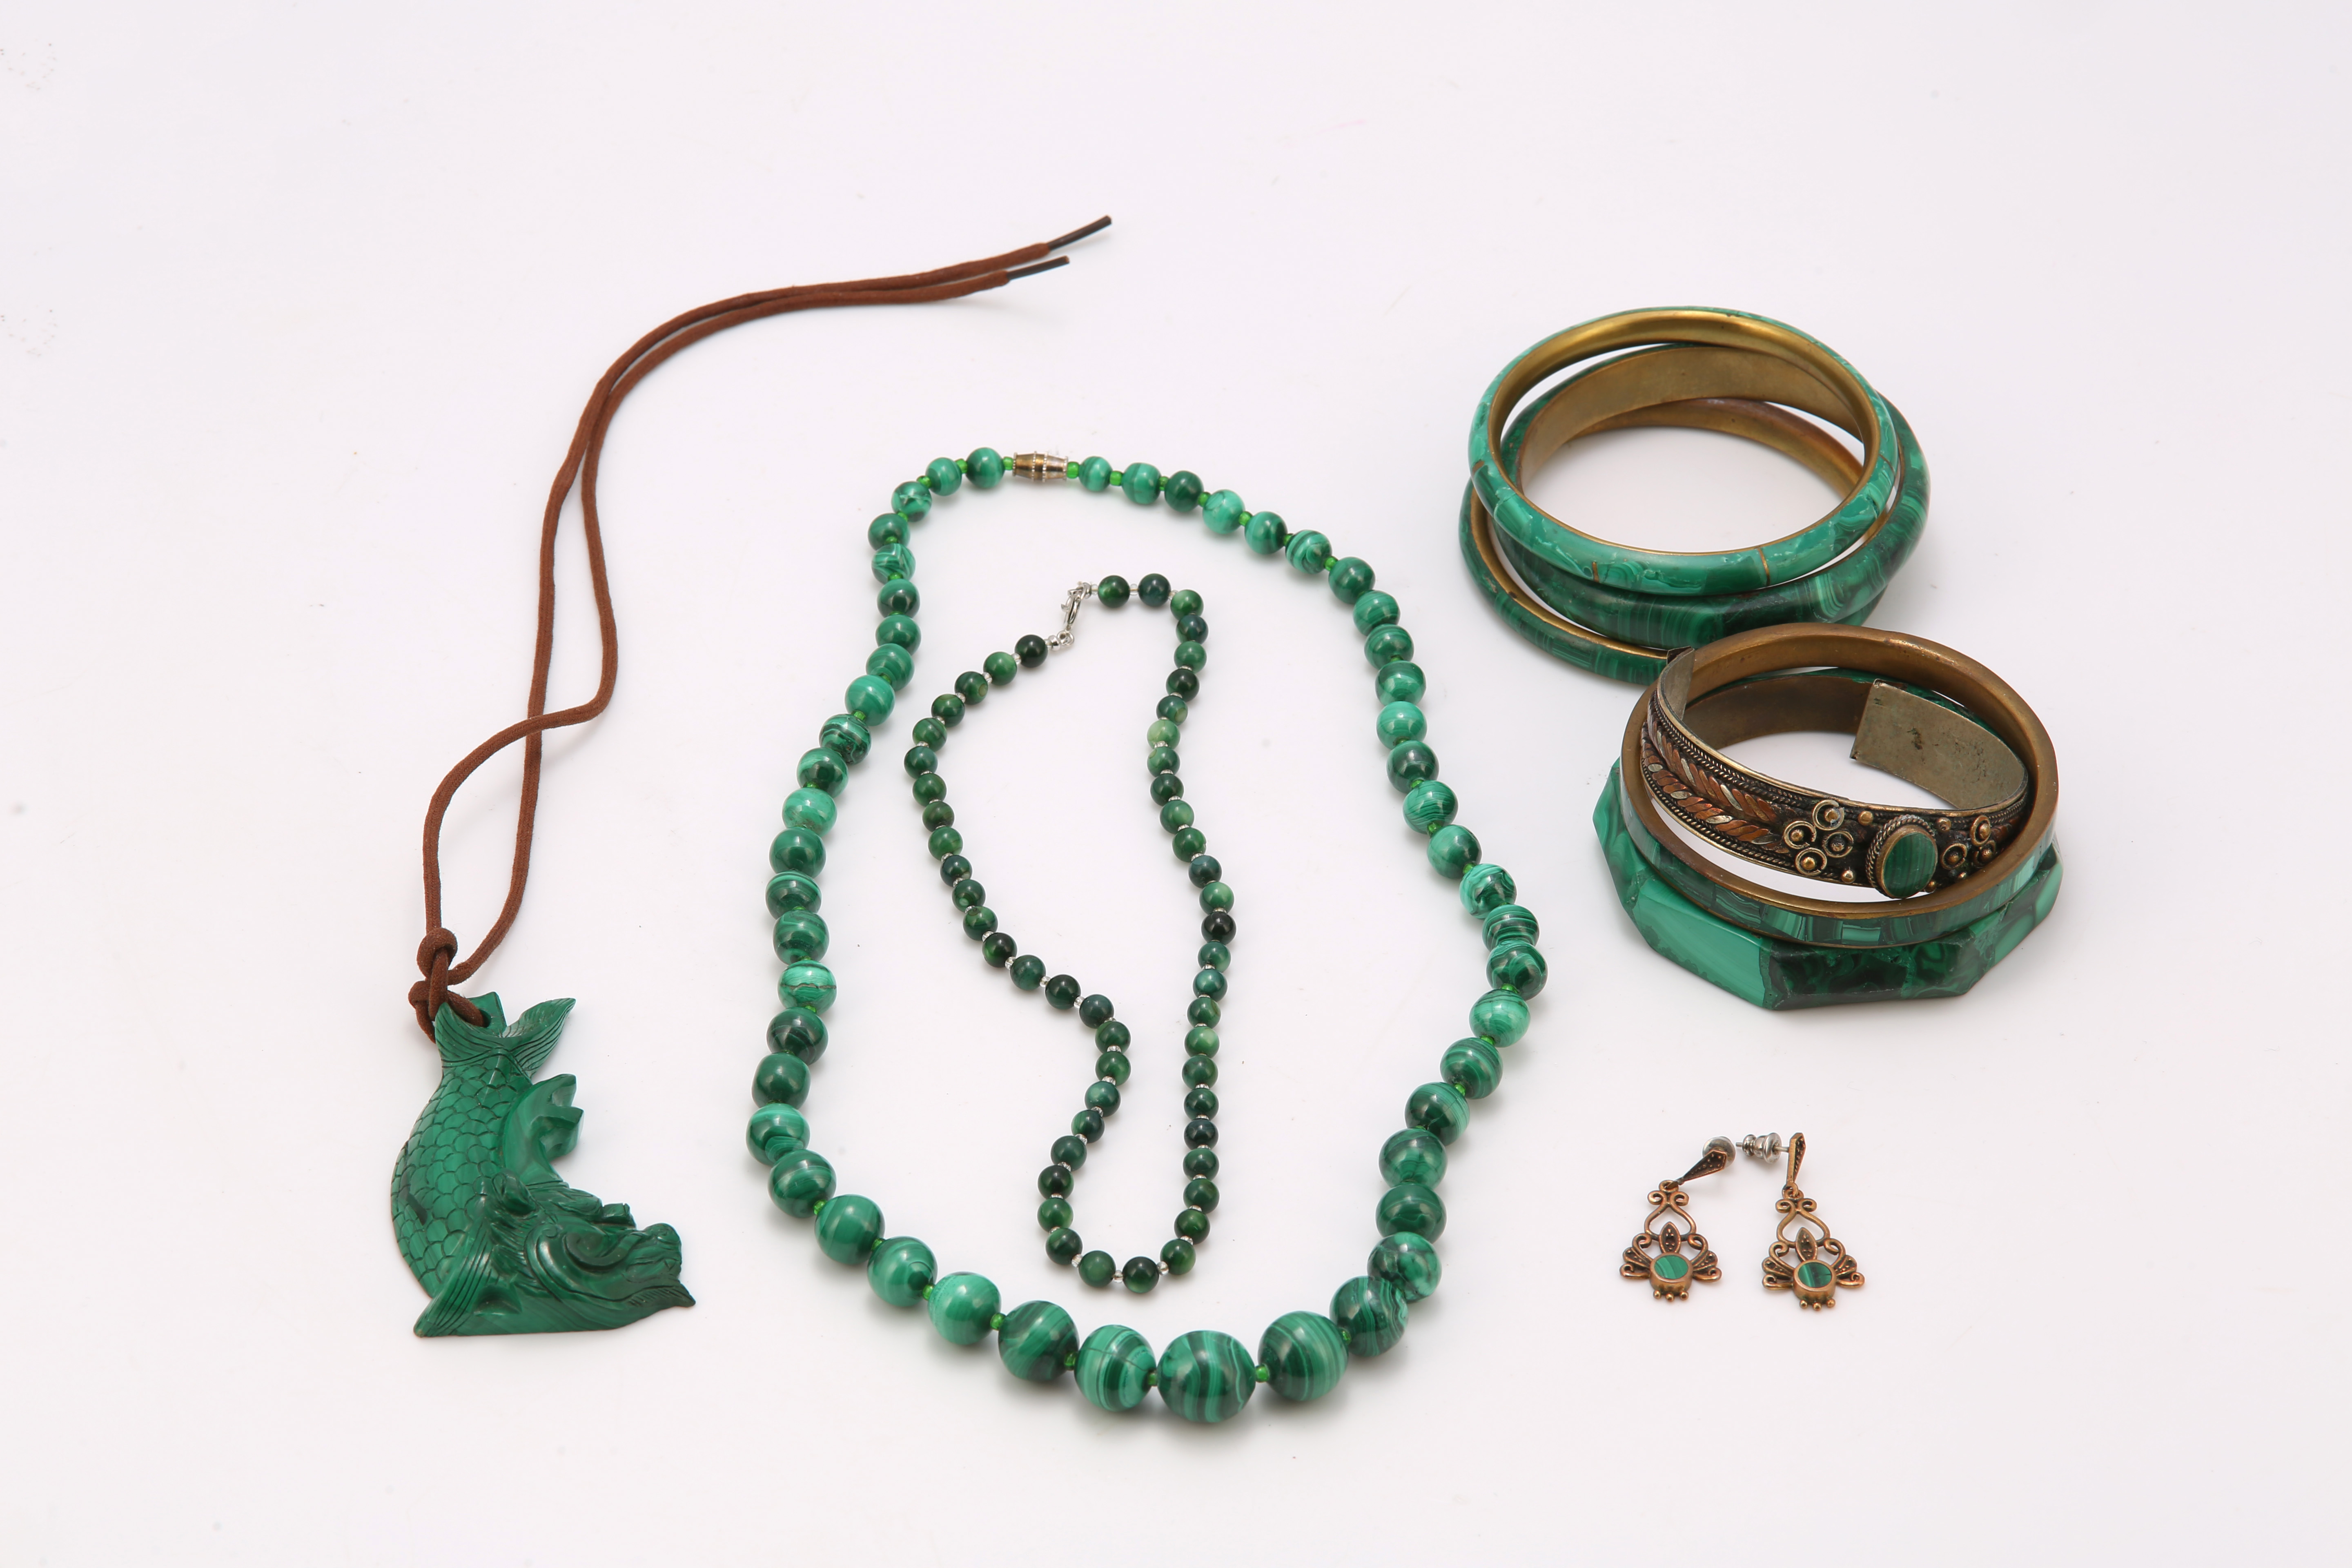 A group of malachite jewellery, including six bangles, two bead necklaces, a carved pendant and a